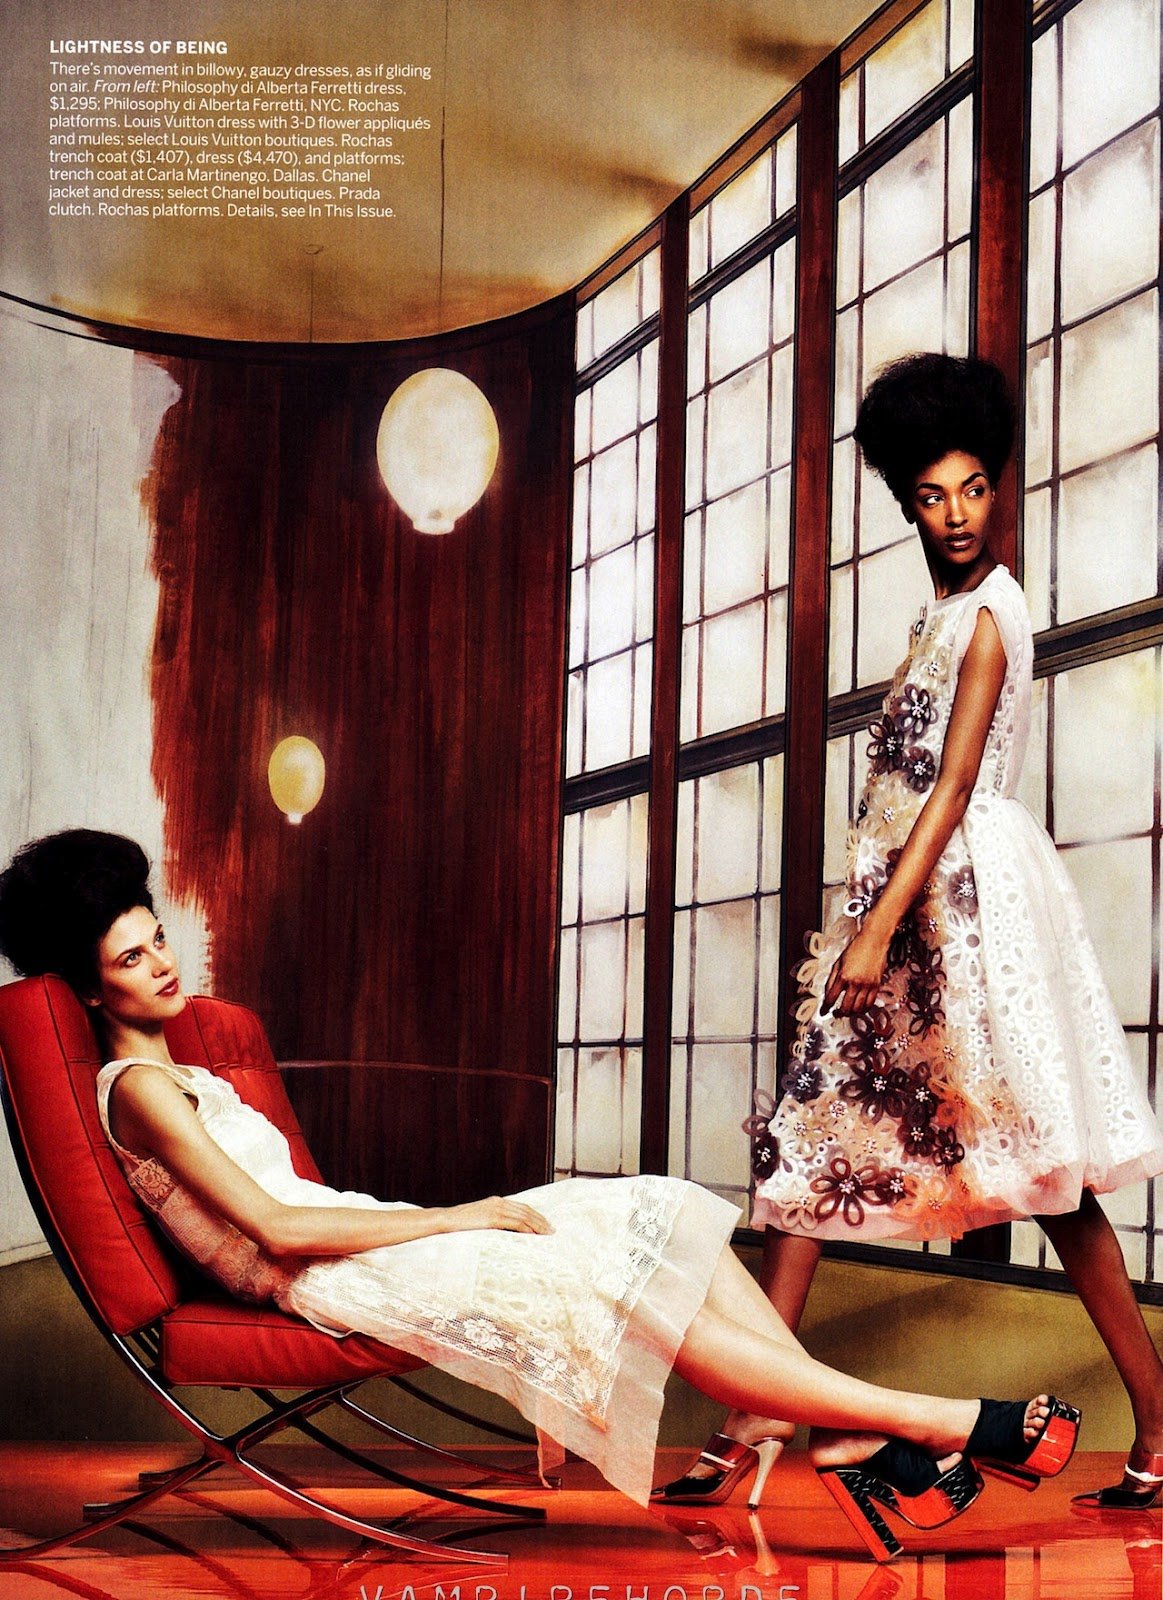 fashion_scans_remastered-craig_mcdean-vogue_usa-march_2012-scanned_by_vampirehorde-hq-13.jpg